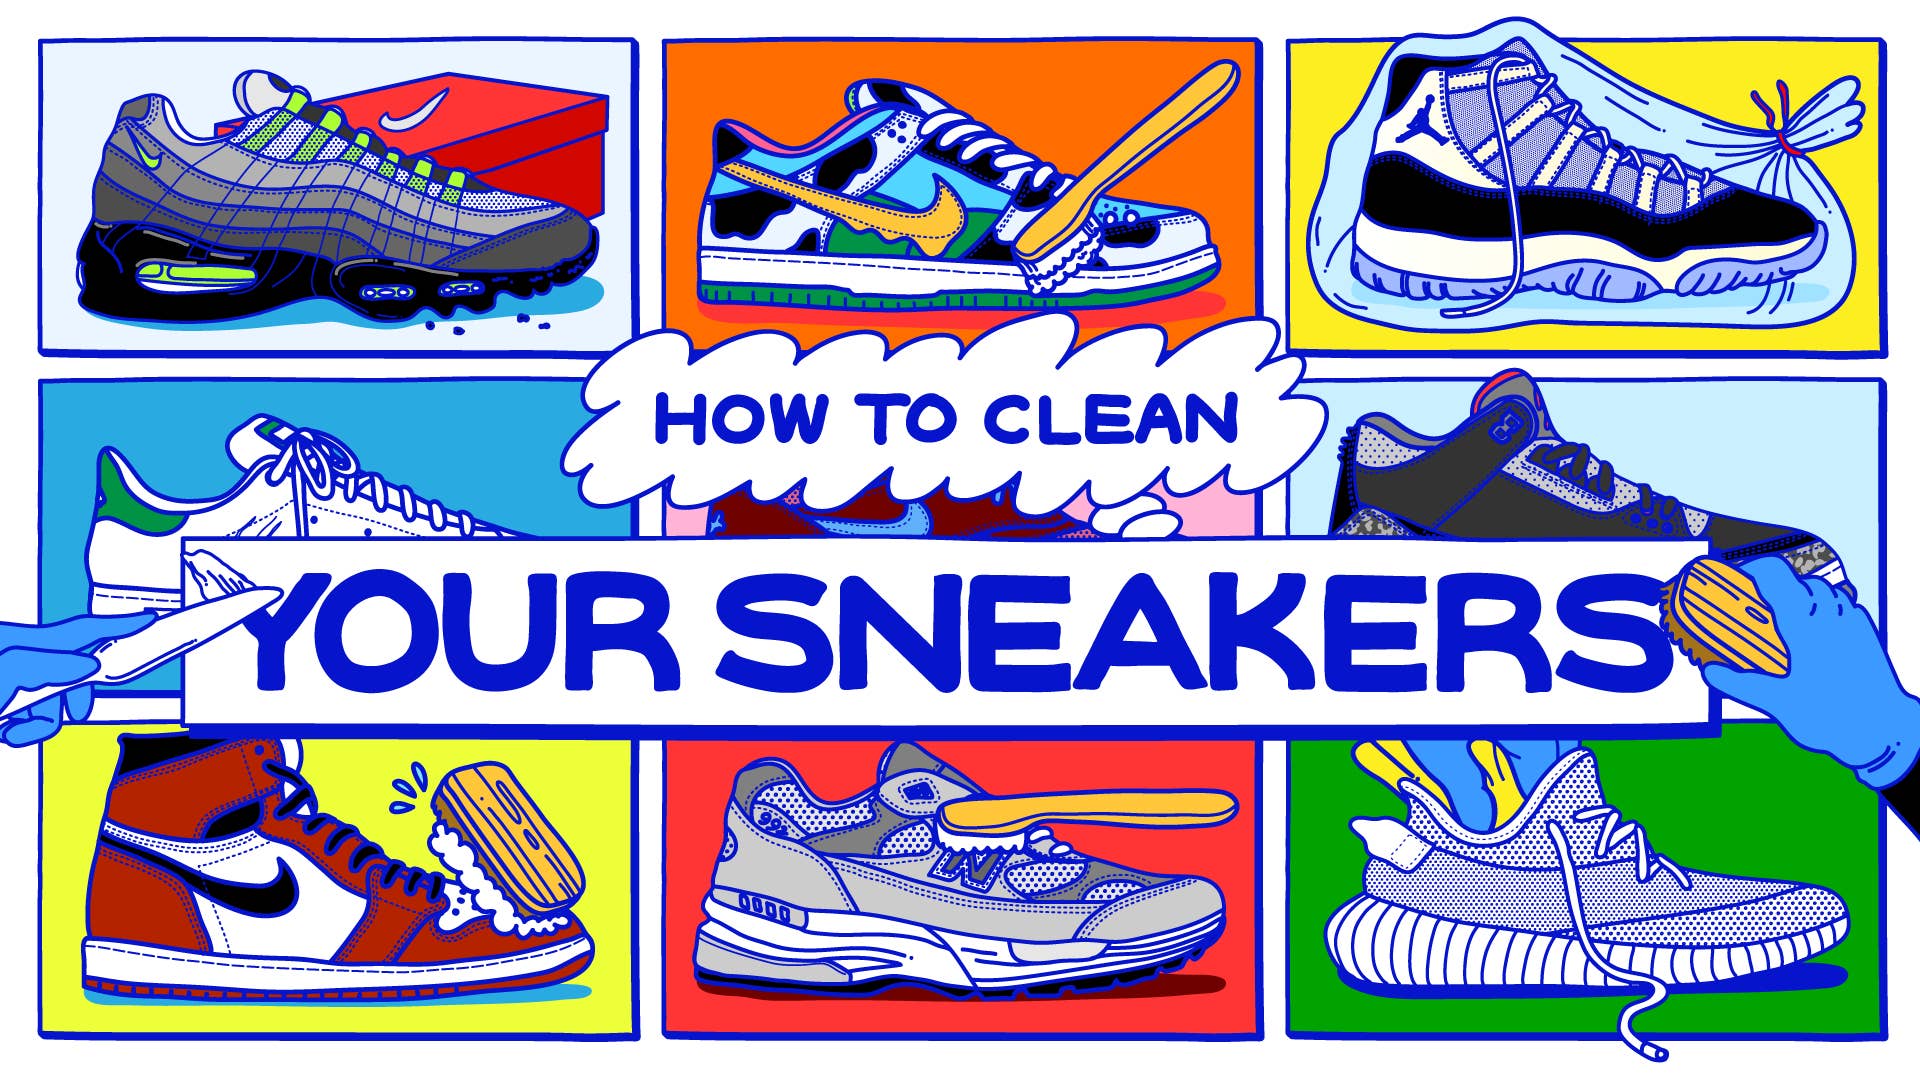 White Sneaker Cleaner Easy Using Fabric Cleaner Effective Remove